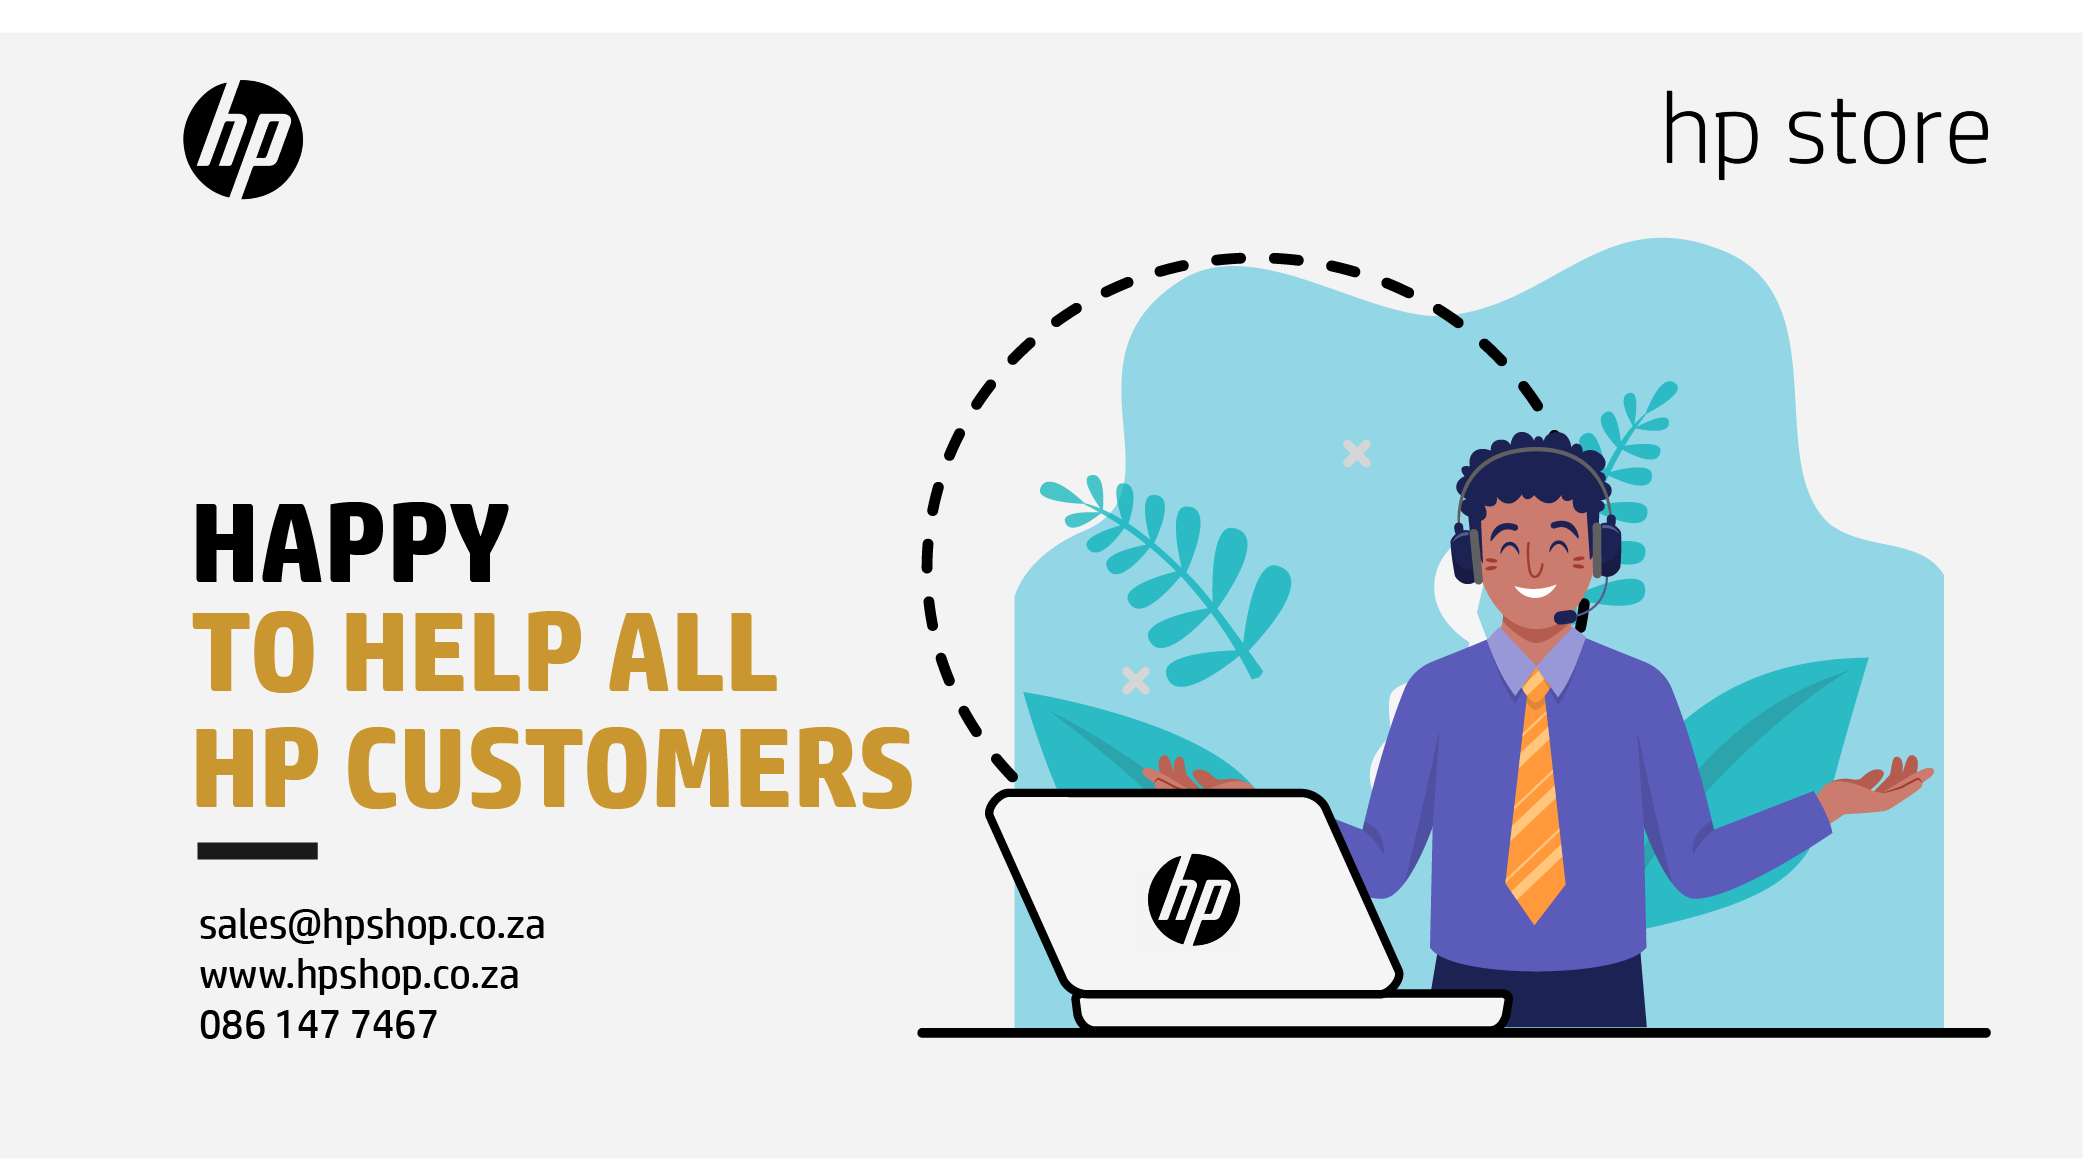 Introducing HP Store's Comprehensive Customer Support Services